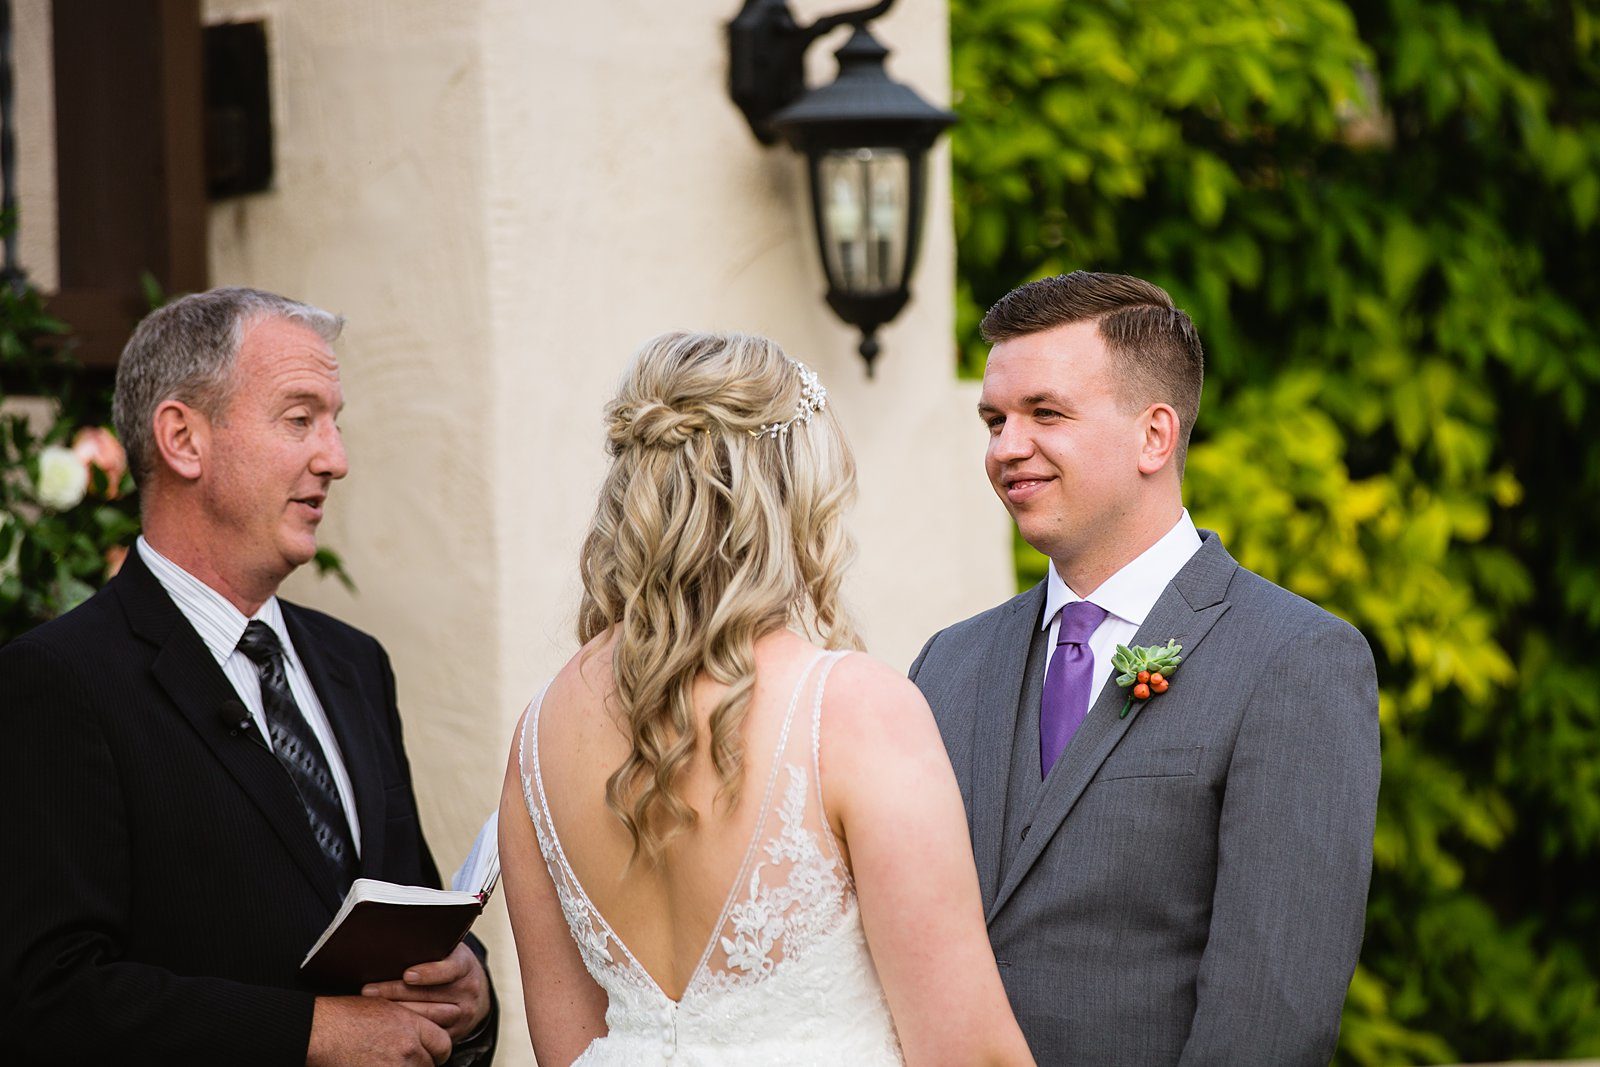 Groom looking at his bride during their wedding ceremony at The Scottsdale Resort at McCormick Ranch by Scottsdale wedding photographer PMA Photography.